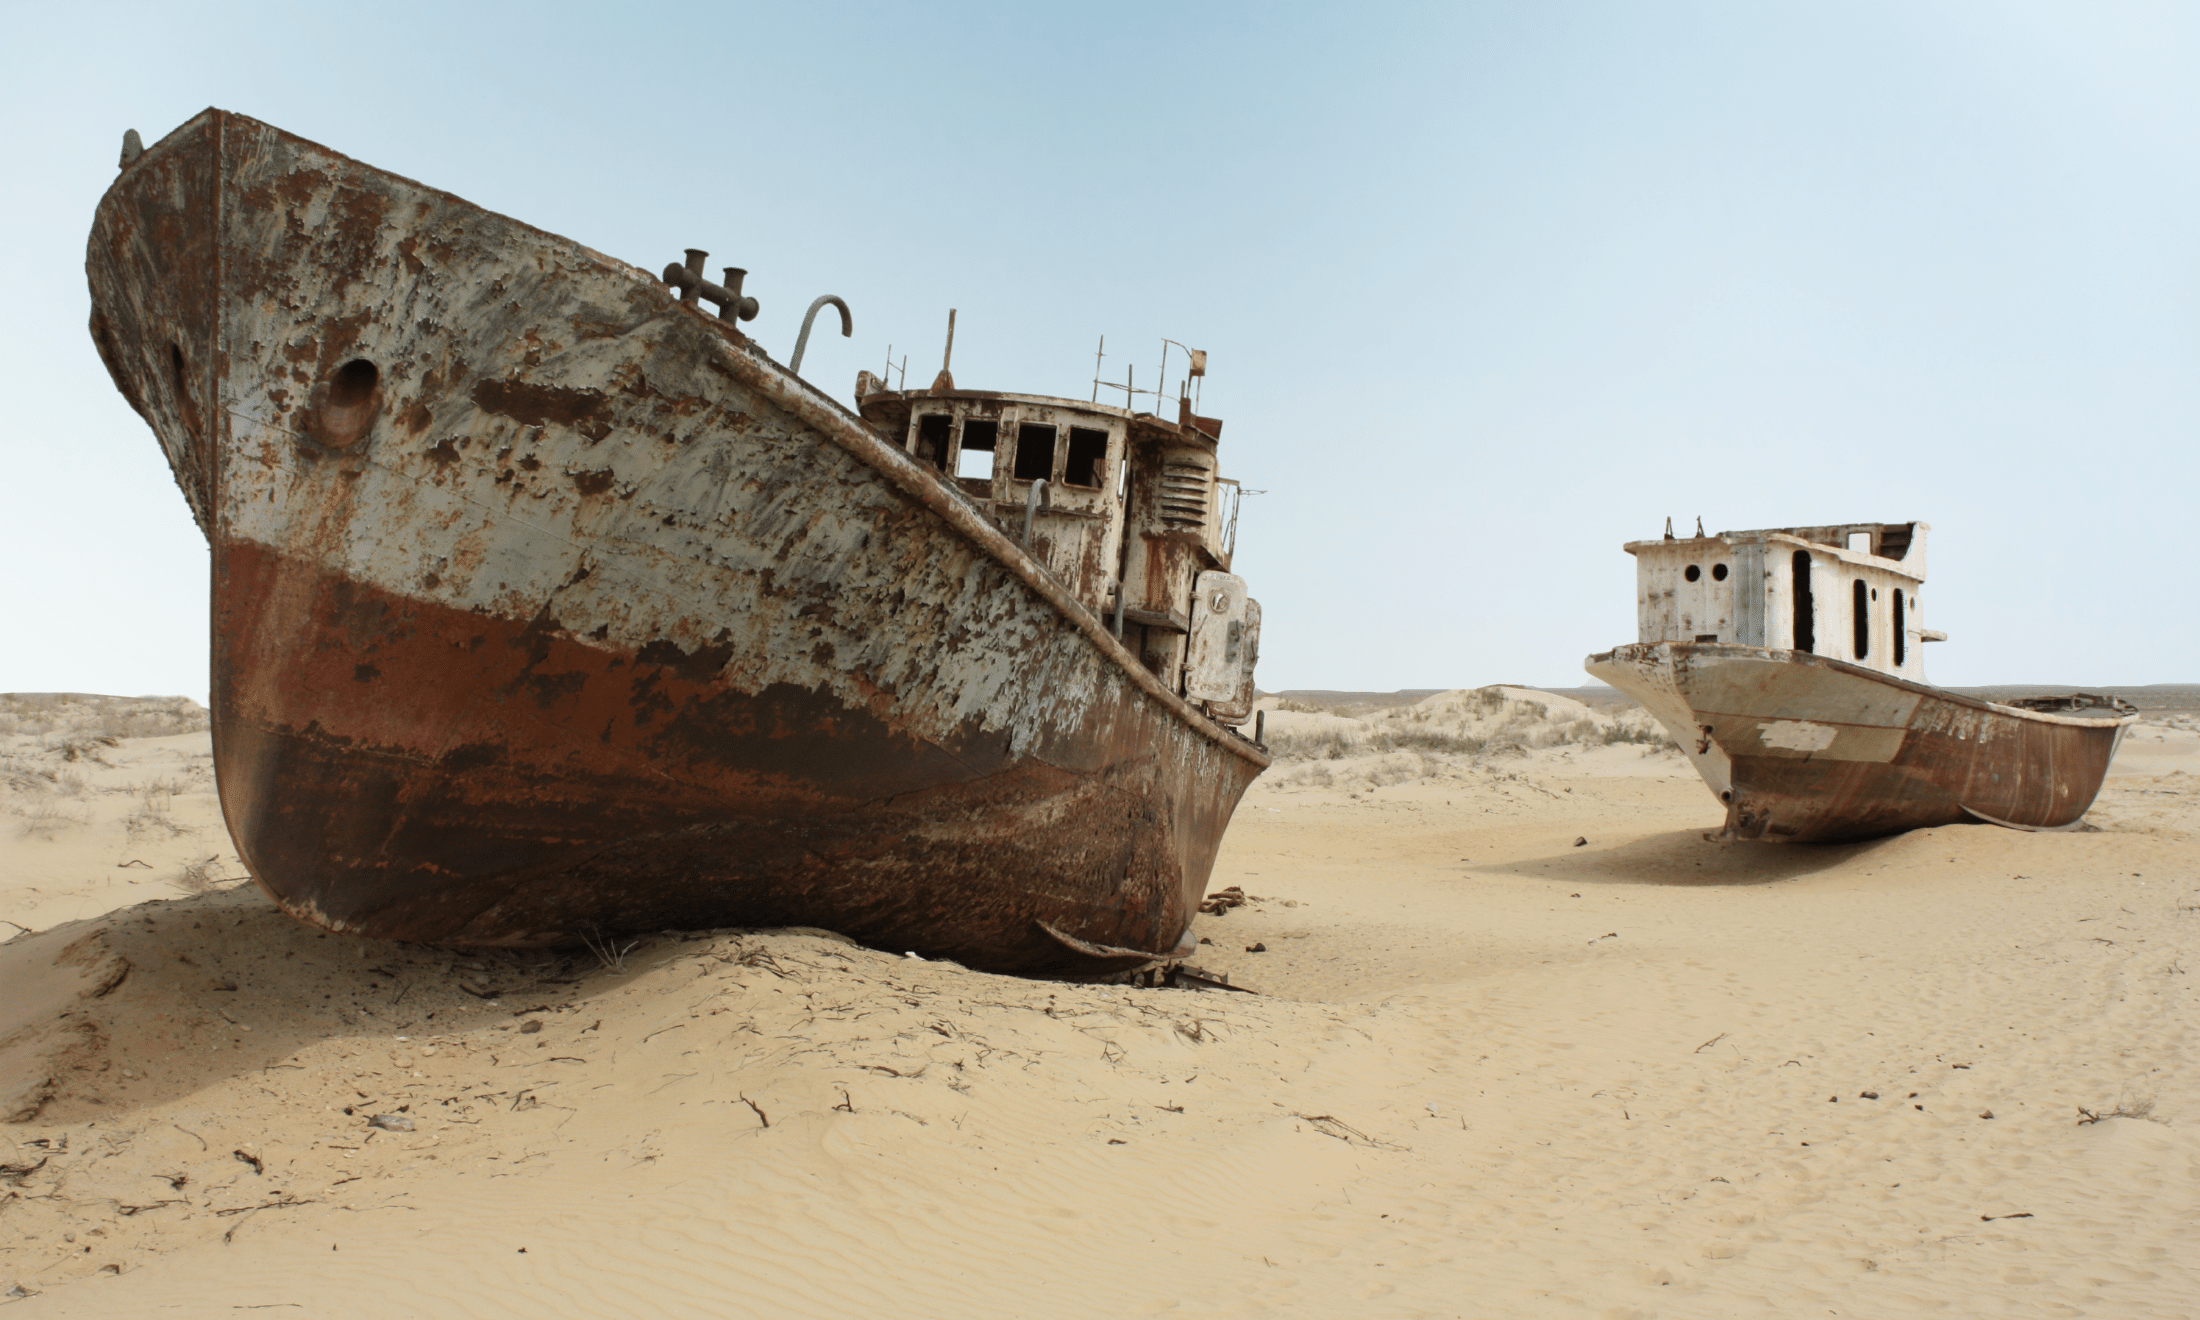 How the Aral Sea disaster created unrest in contemporary Uzbekistan